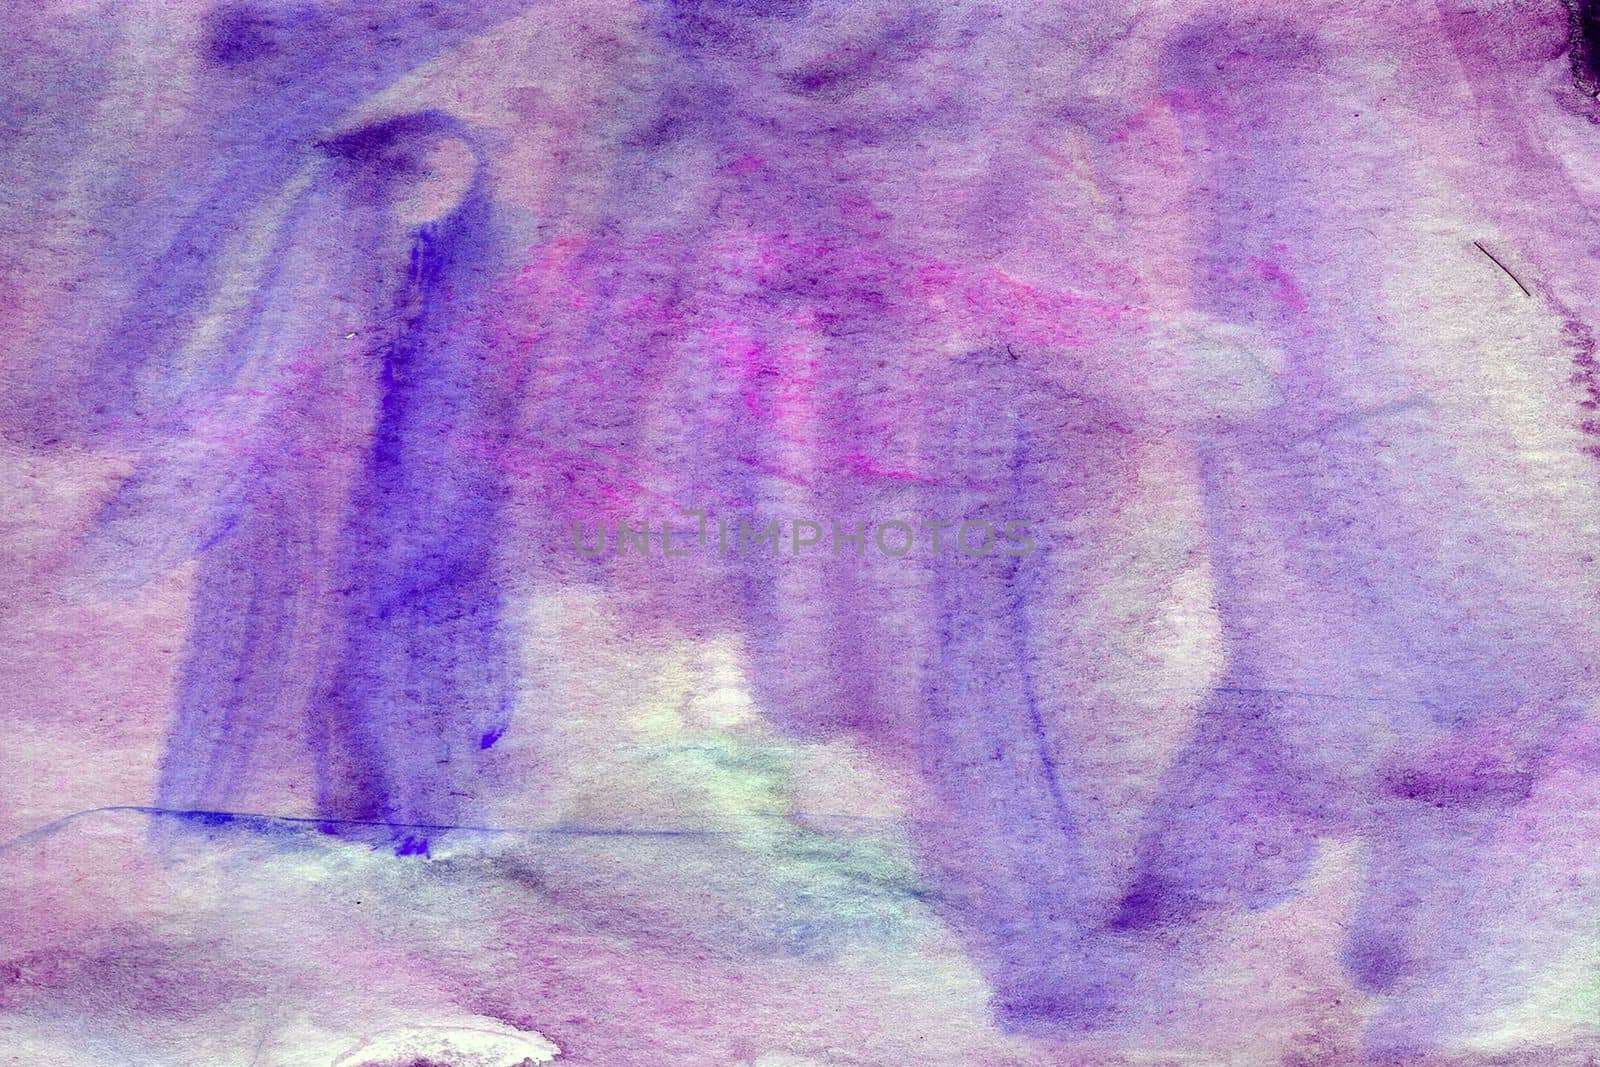 Hand drawn watercolor pink texture . High quality illustration